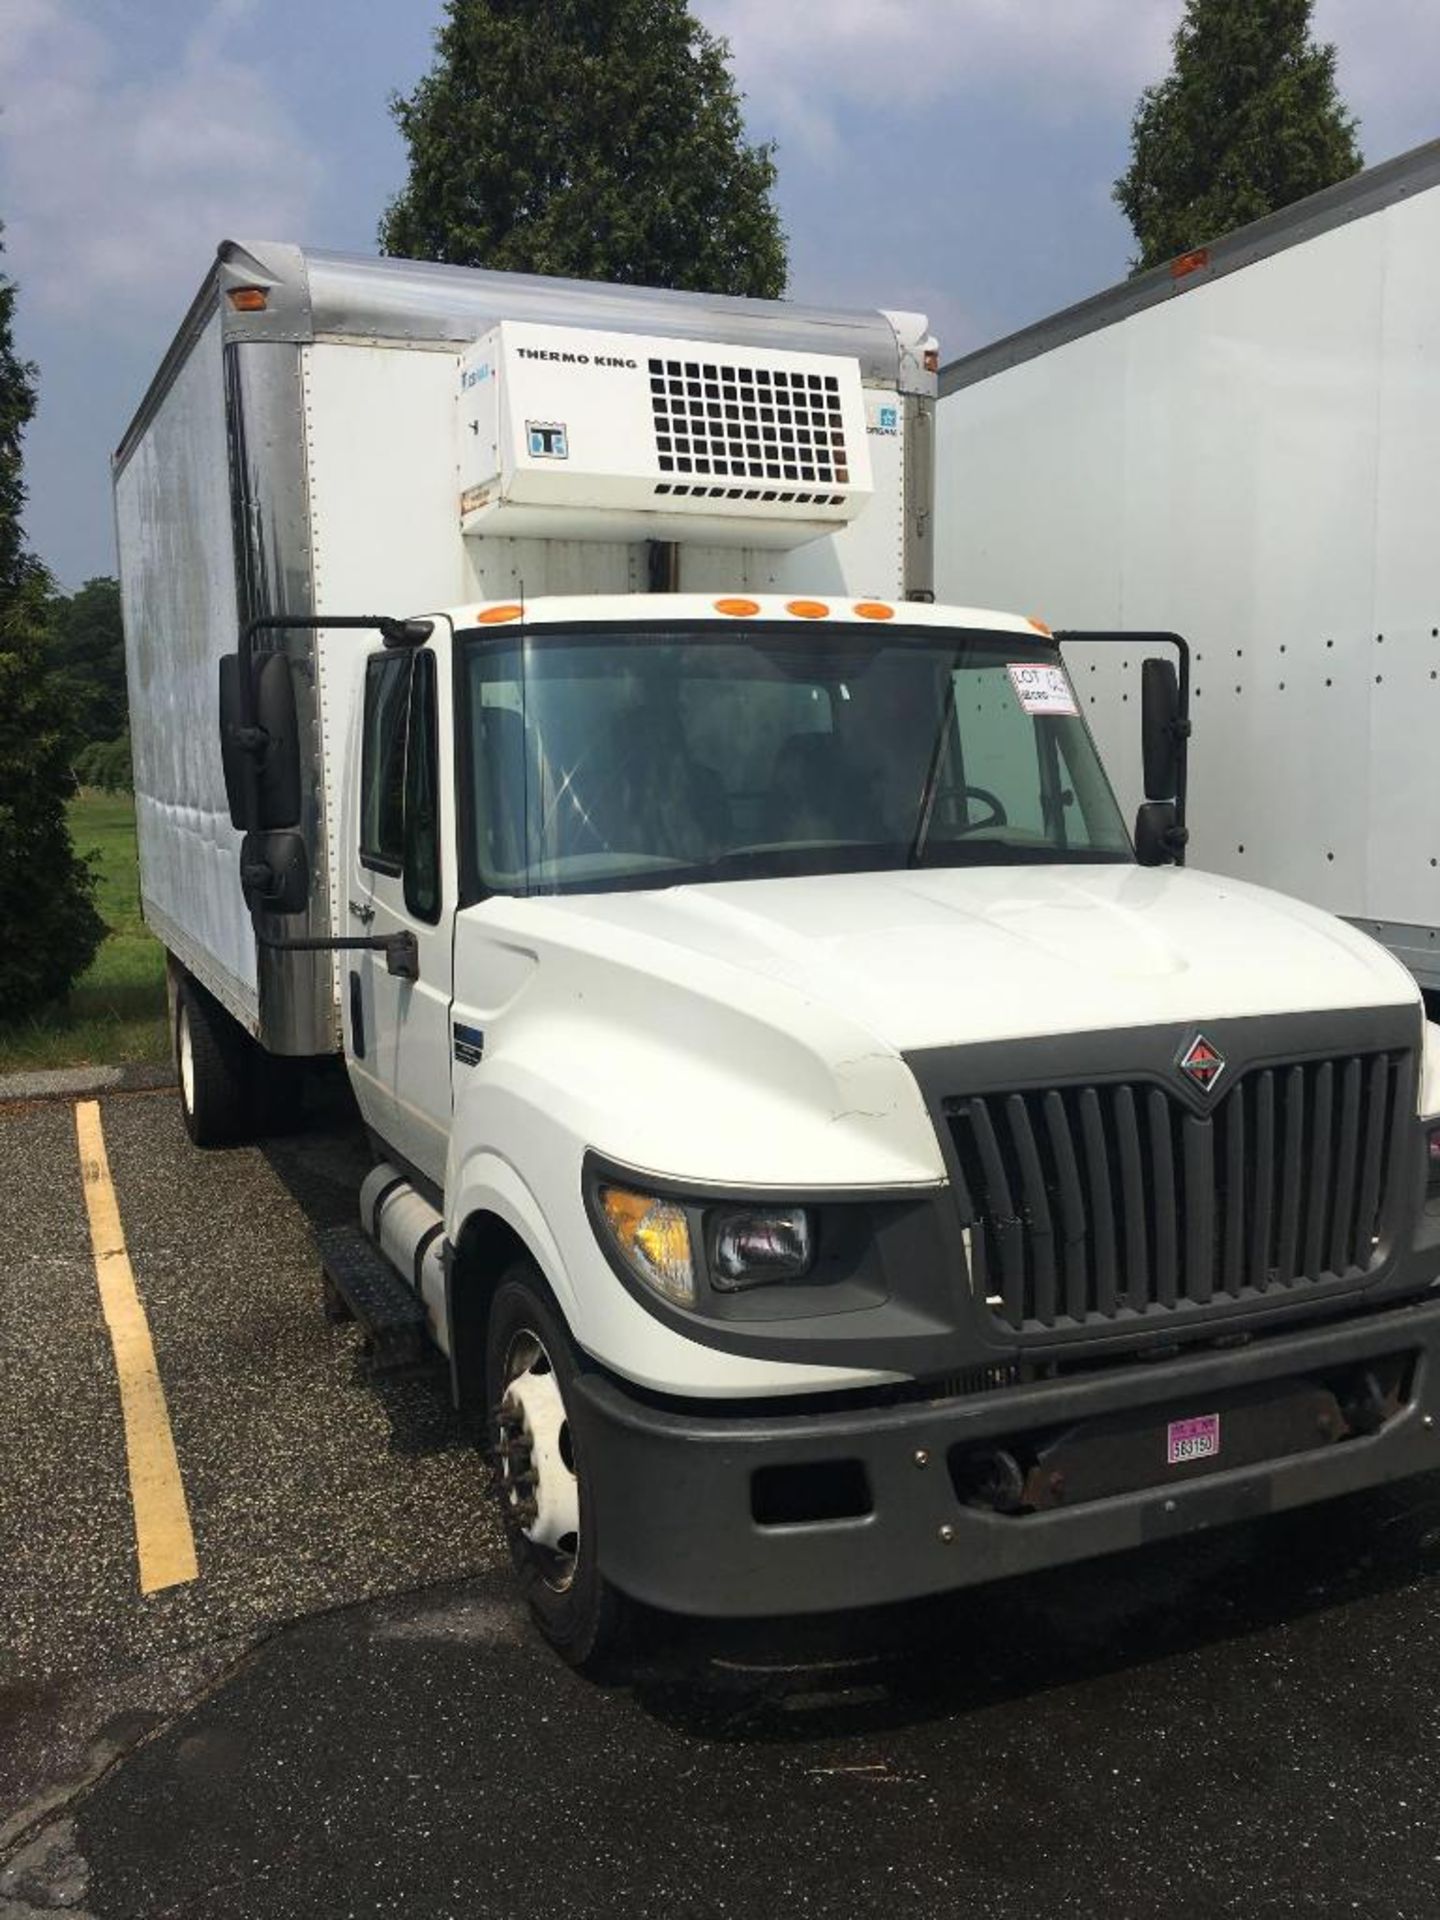 2012 International TerraStar Refrigerated Box Truck, Automatic Transmission, 167,000 miles, Thermo